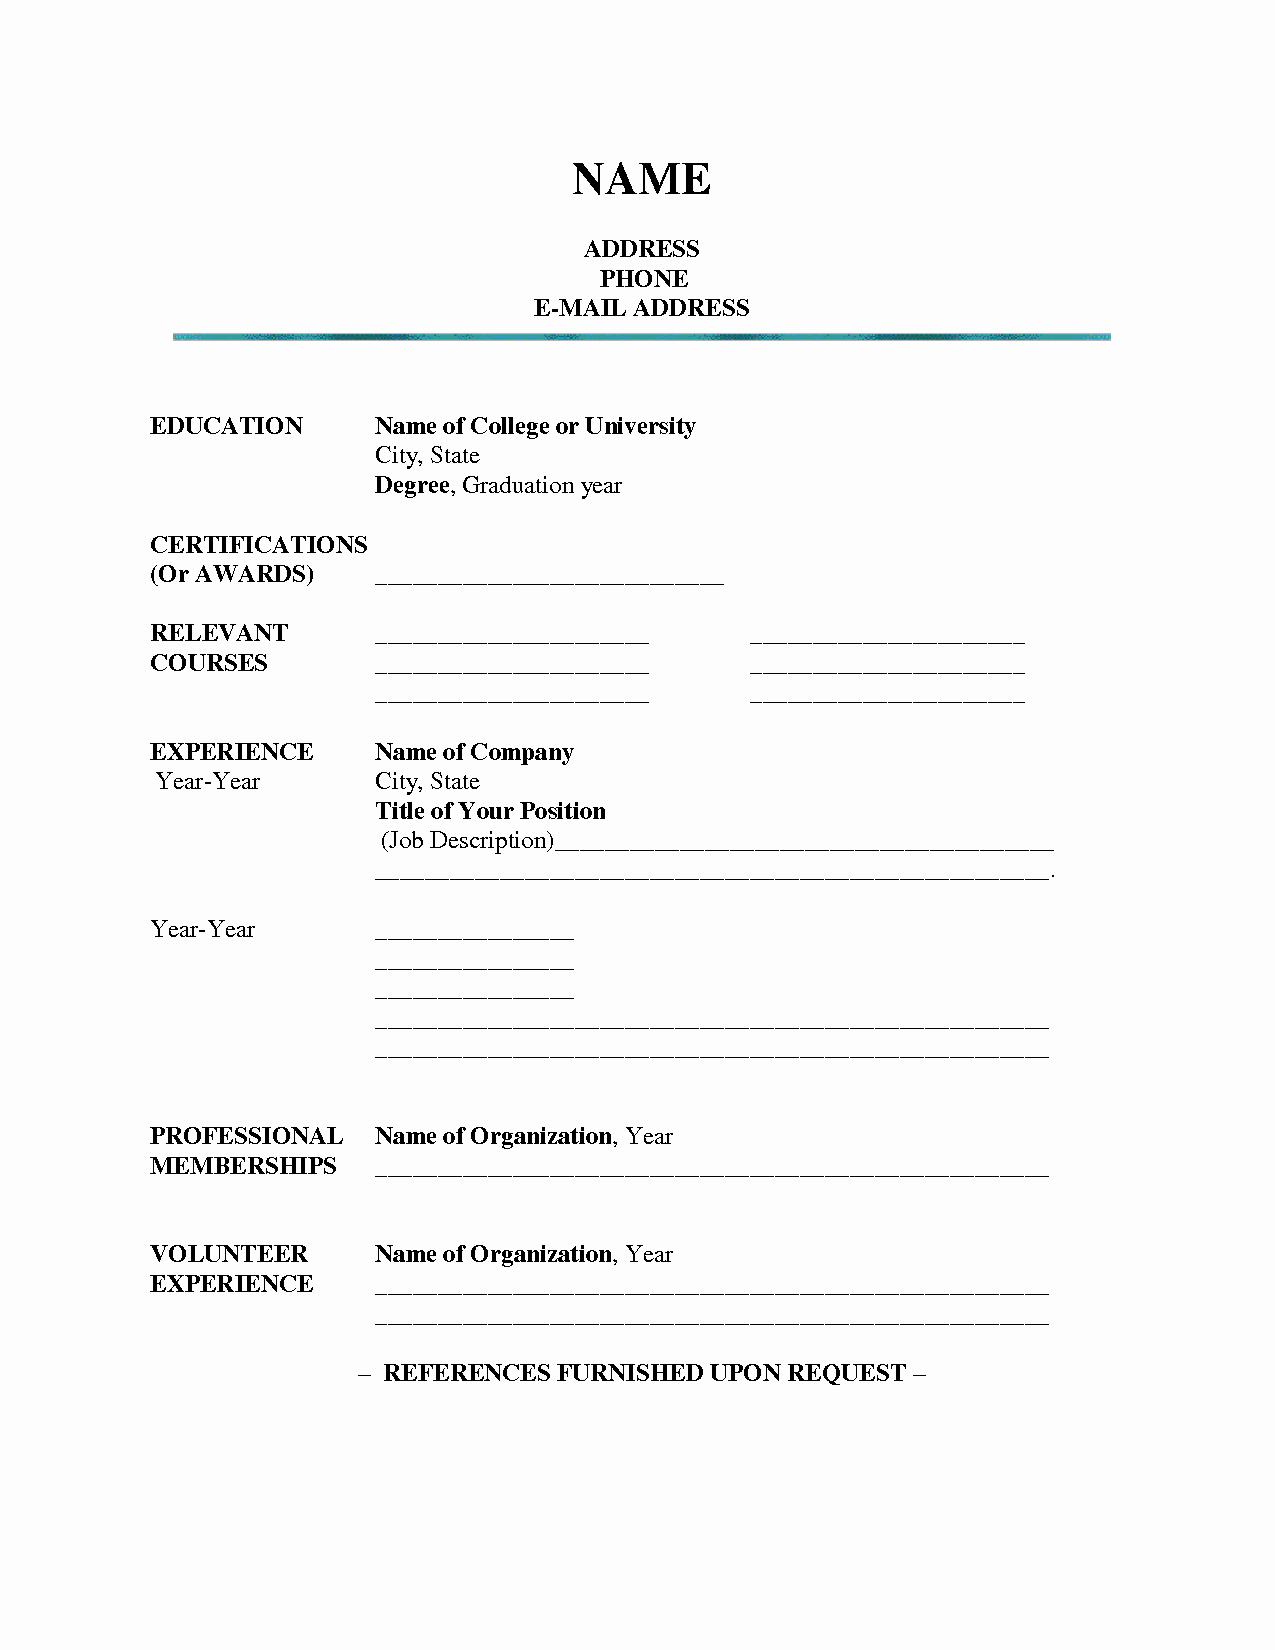 Resumes Fill In the Blanks Best Of Blank Resume Template